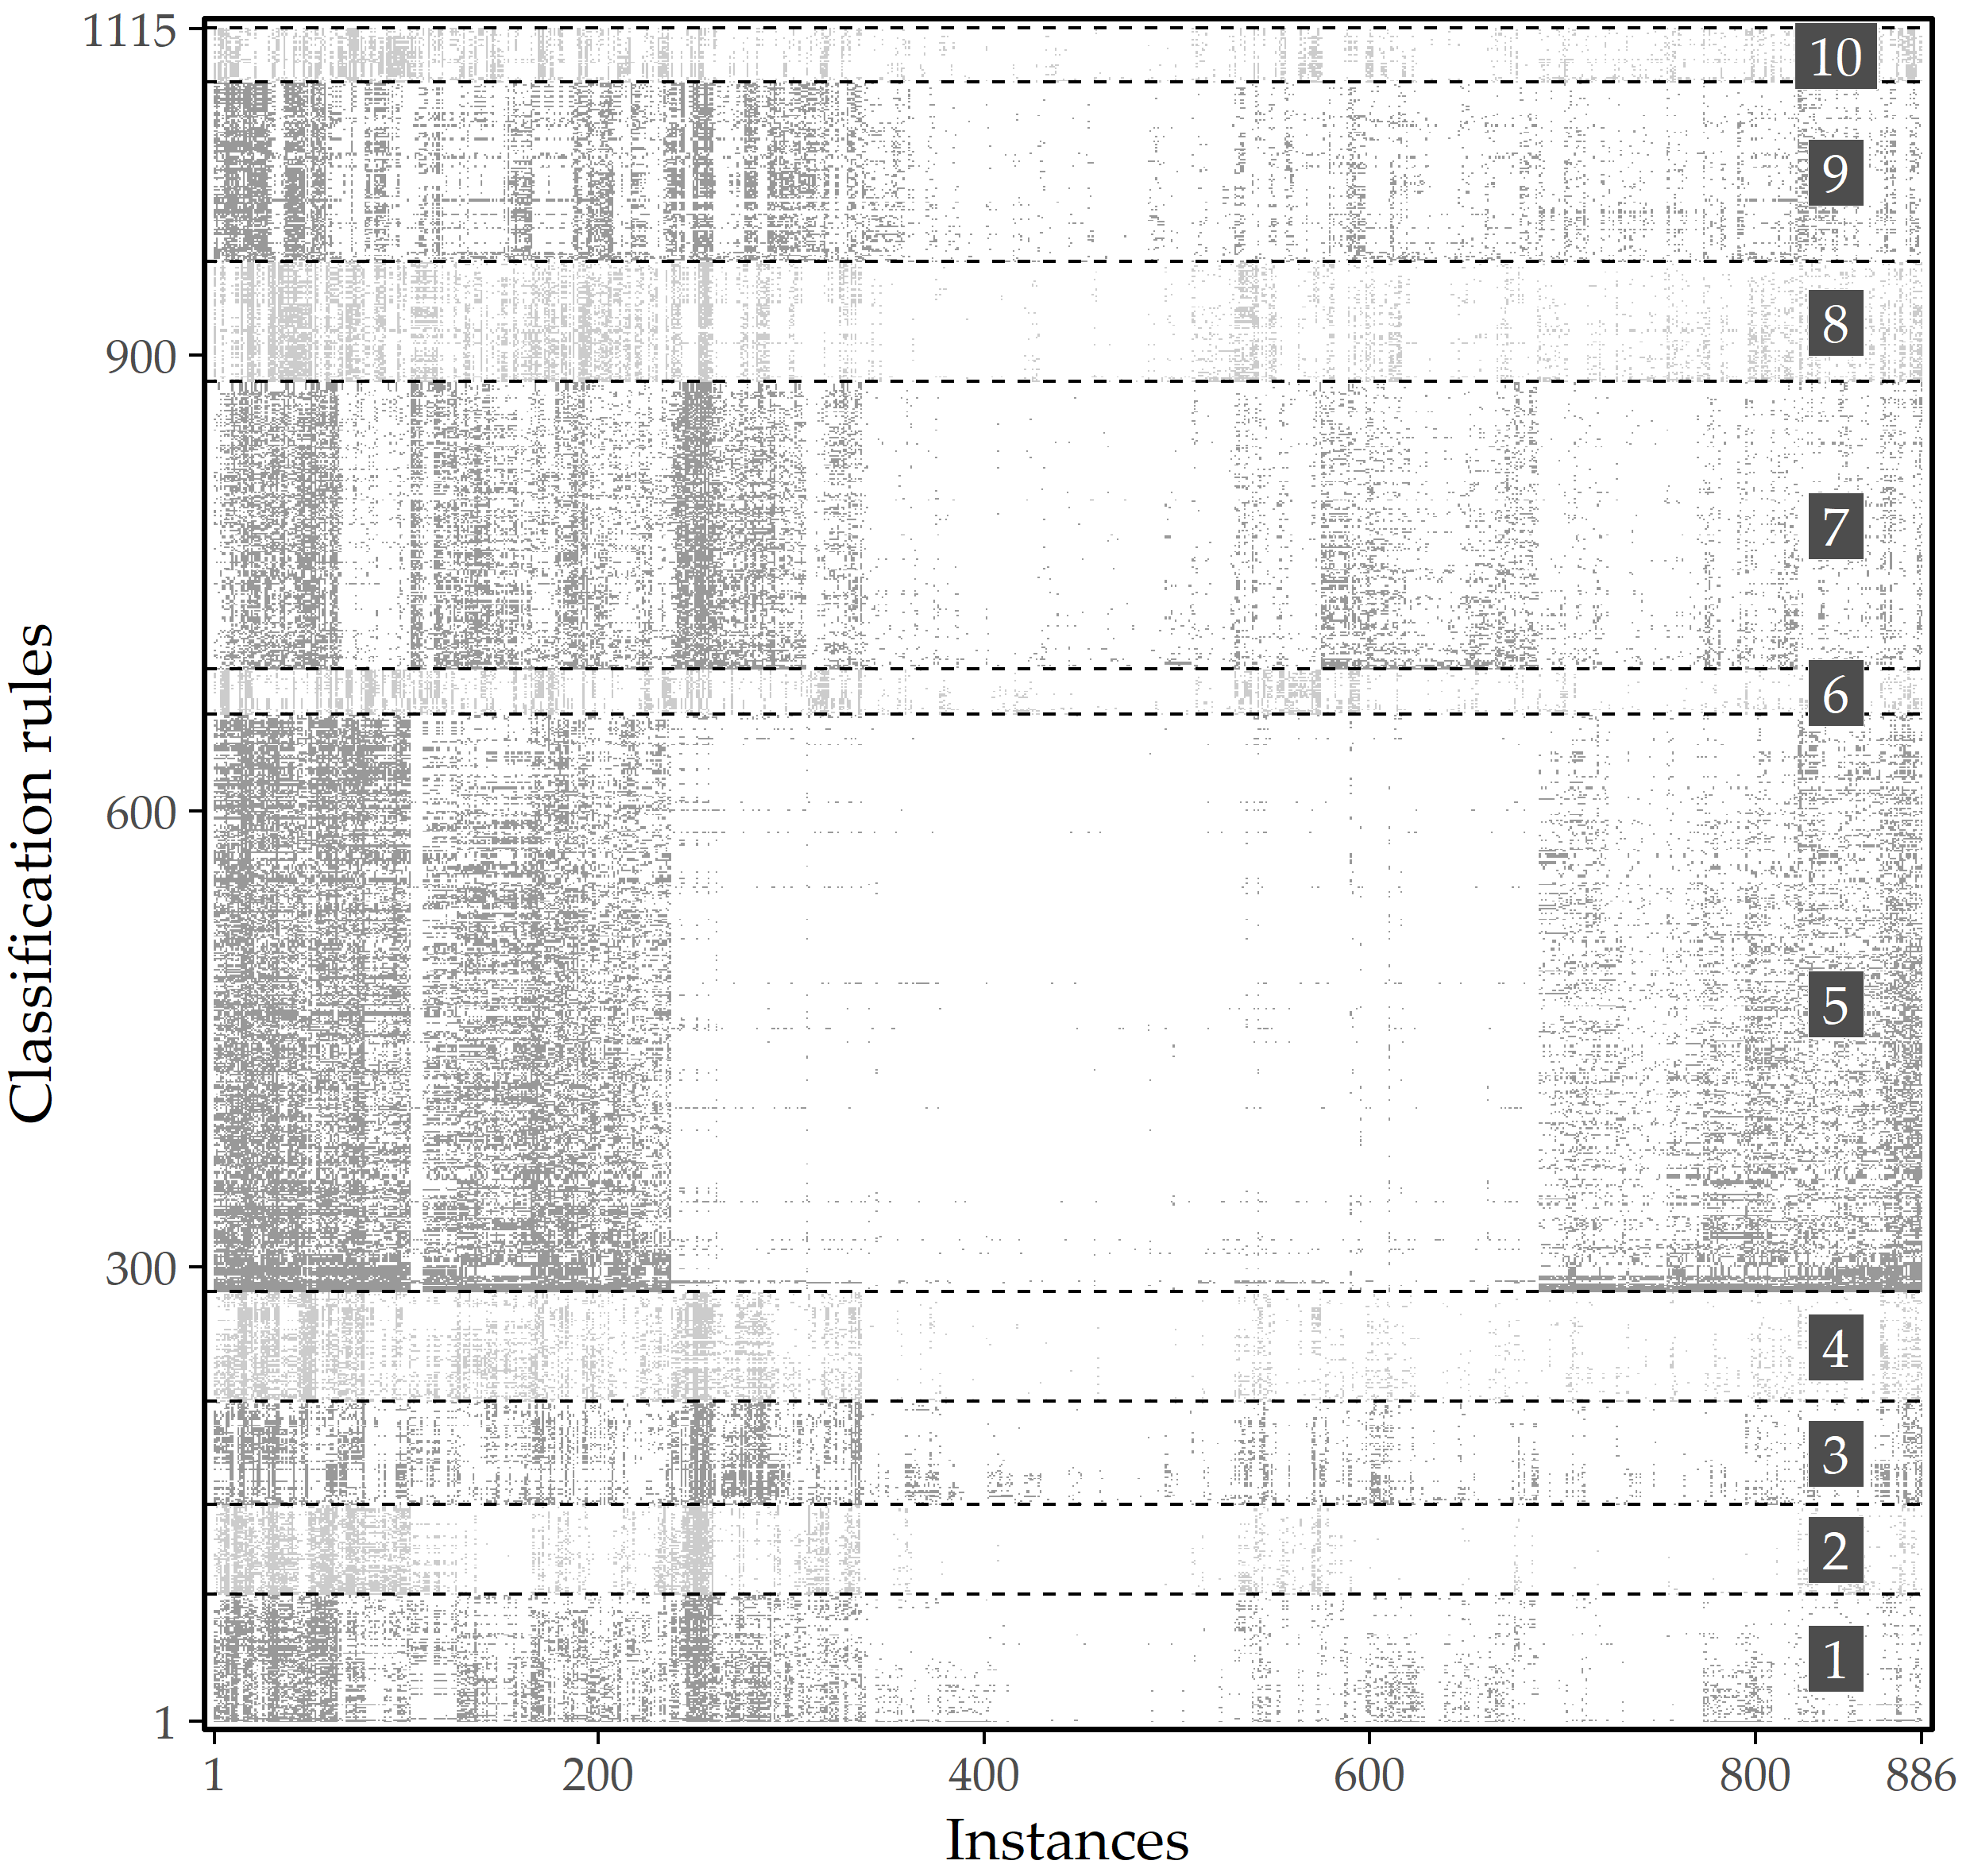 Illustration of rule redundancy. Graphical representation of 1115 HotSpot rules found on SHIP data on 886 labeled instances. A gray cell indicates that the instance at that x-position is covered by the rule at the associated y-position. Instances and rules are sorted by agglomerative hierarchical clustering. When partitioning into 10 clusters based on the covered instances, each cluster’s rules describe similar subpopulations.